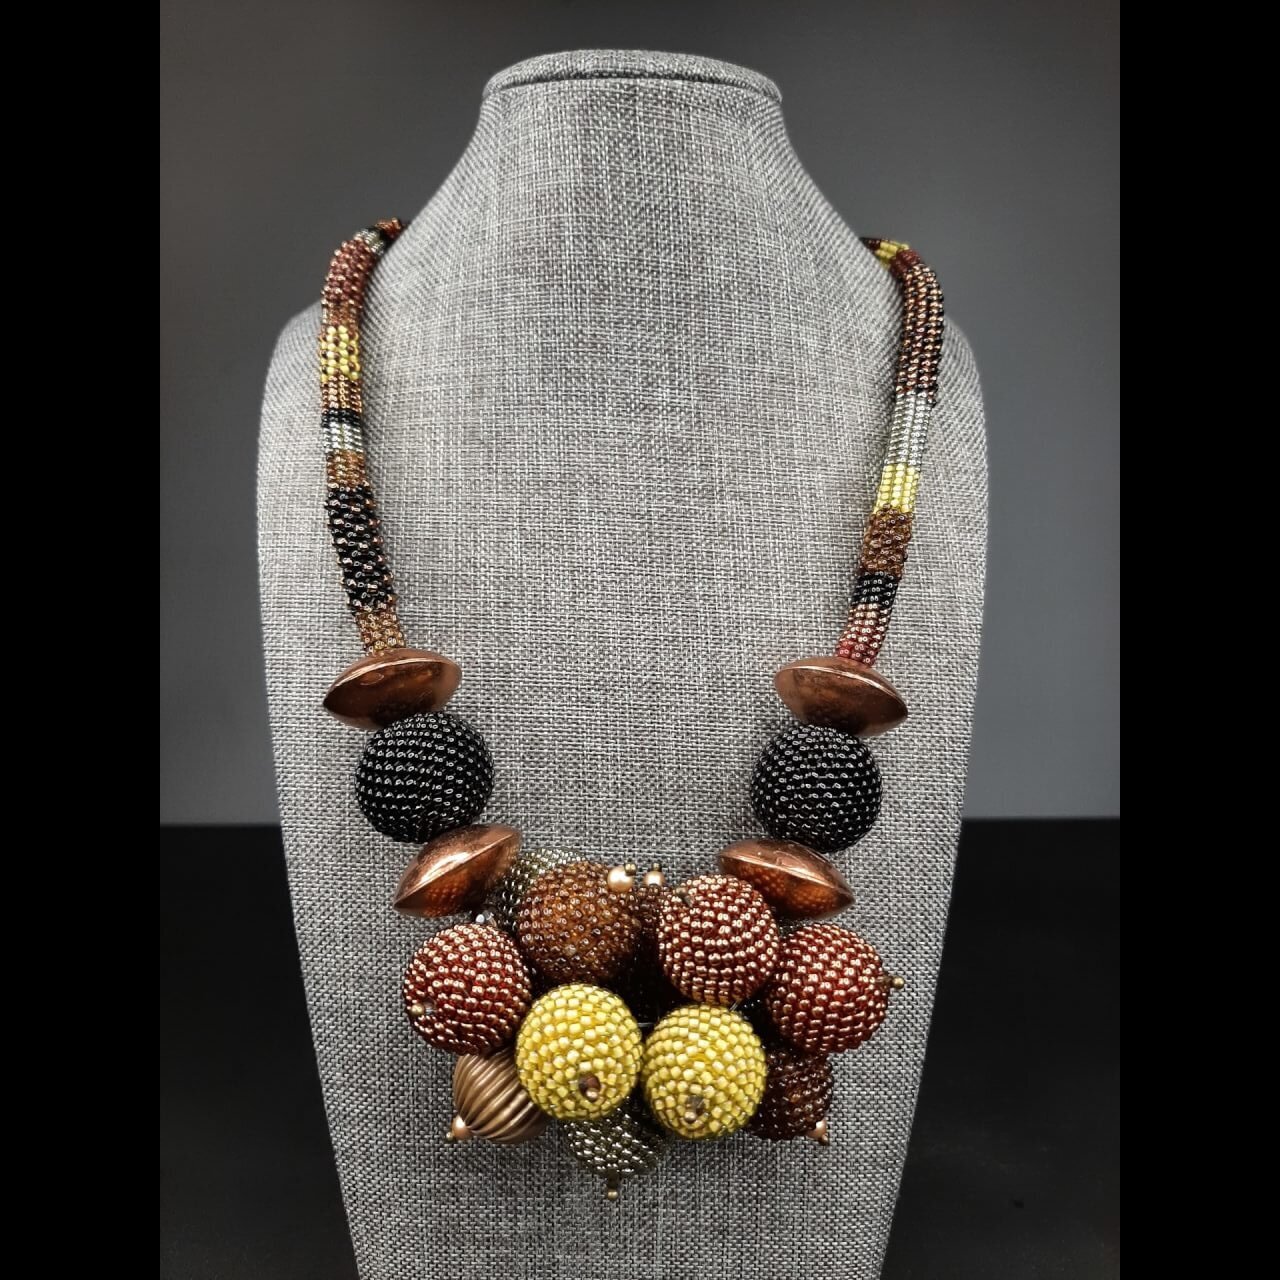 necklace made of large beads constructed from small seed beads